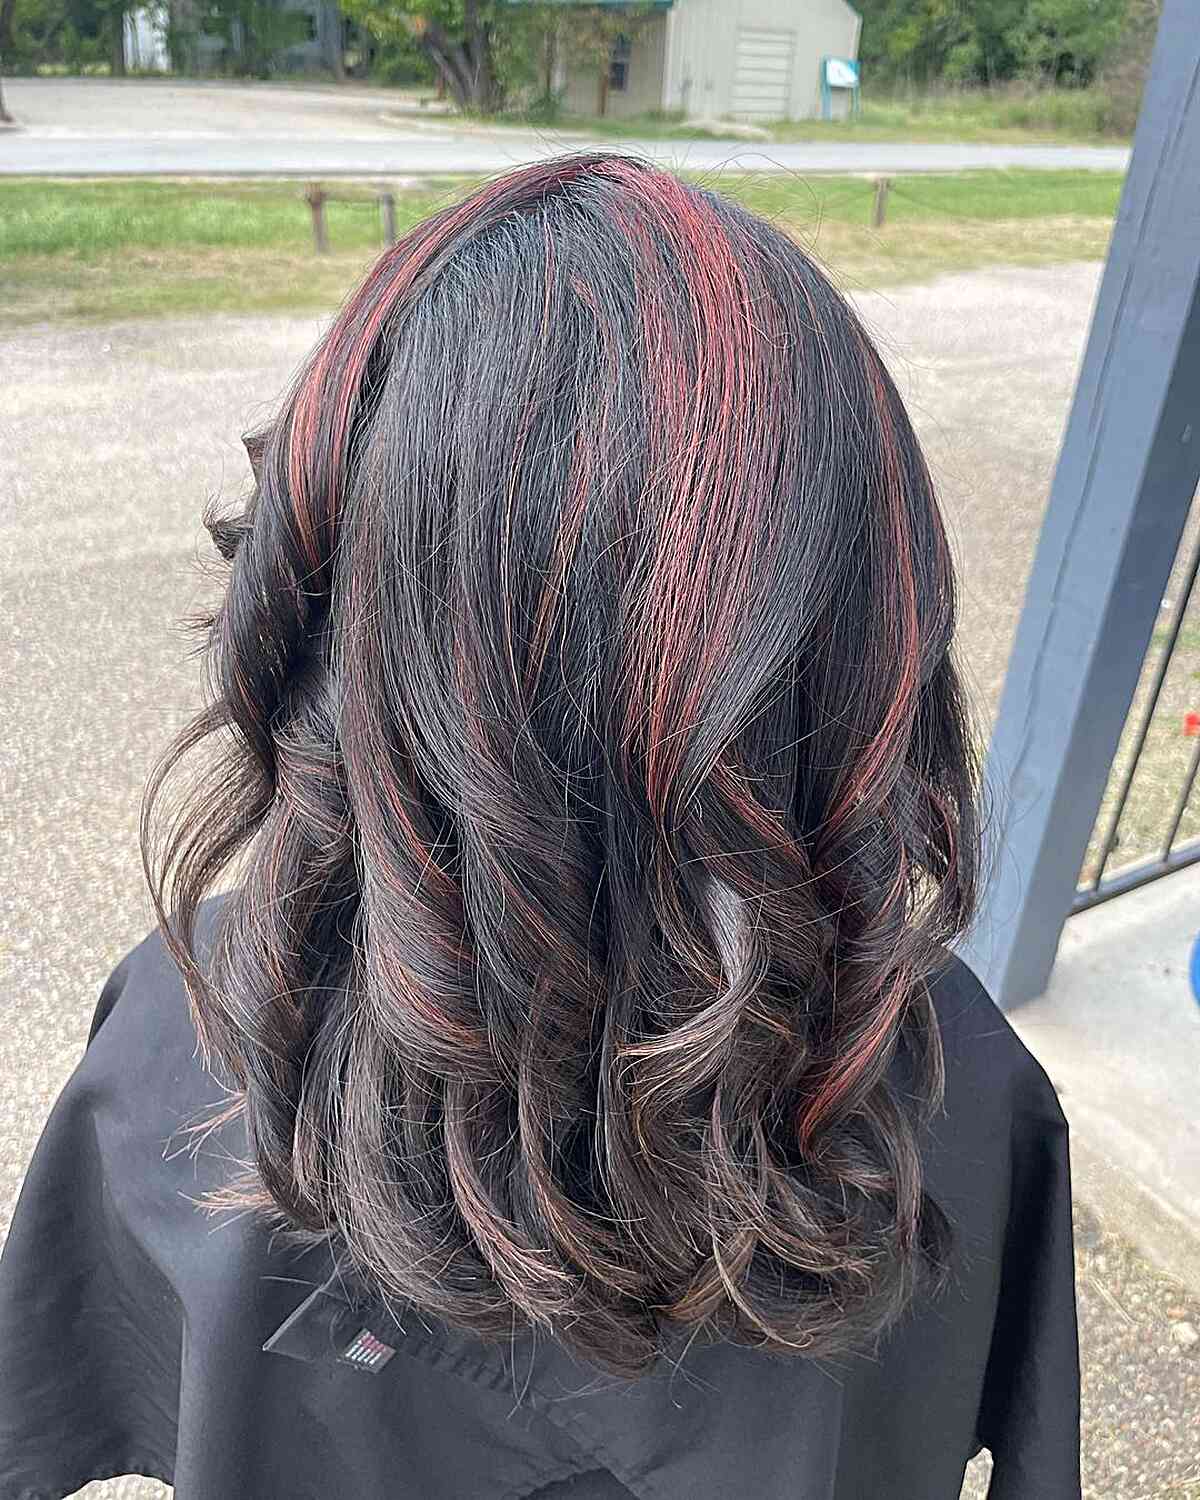 Red Thin Highlights and Loose Curls for Medium-Length Brown Hair